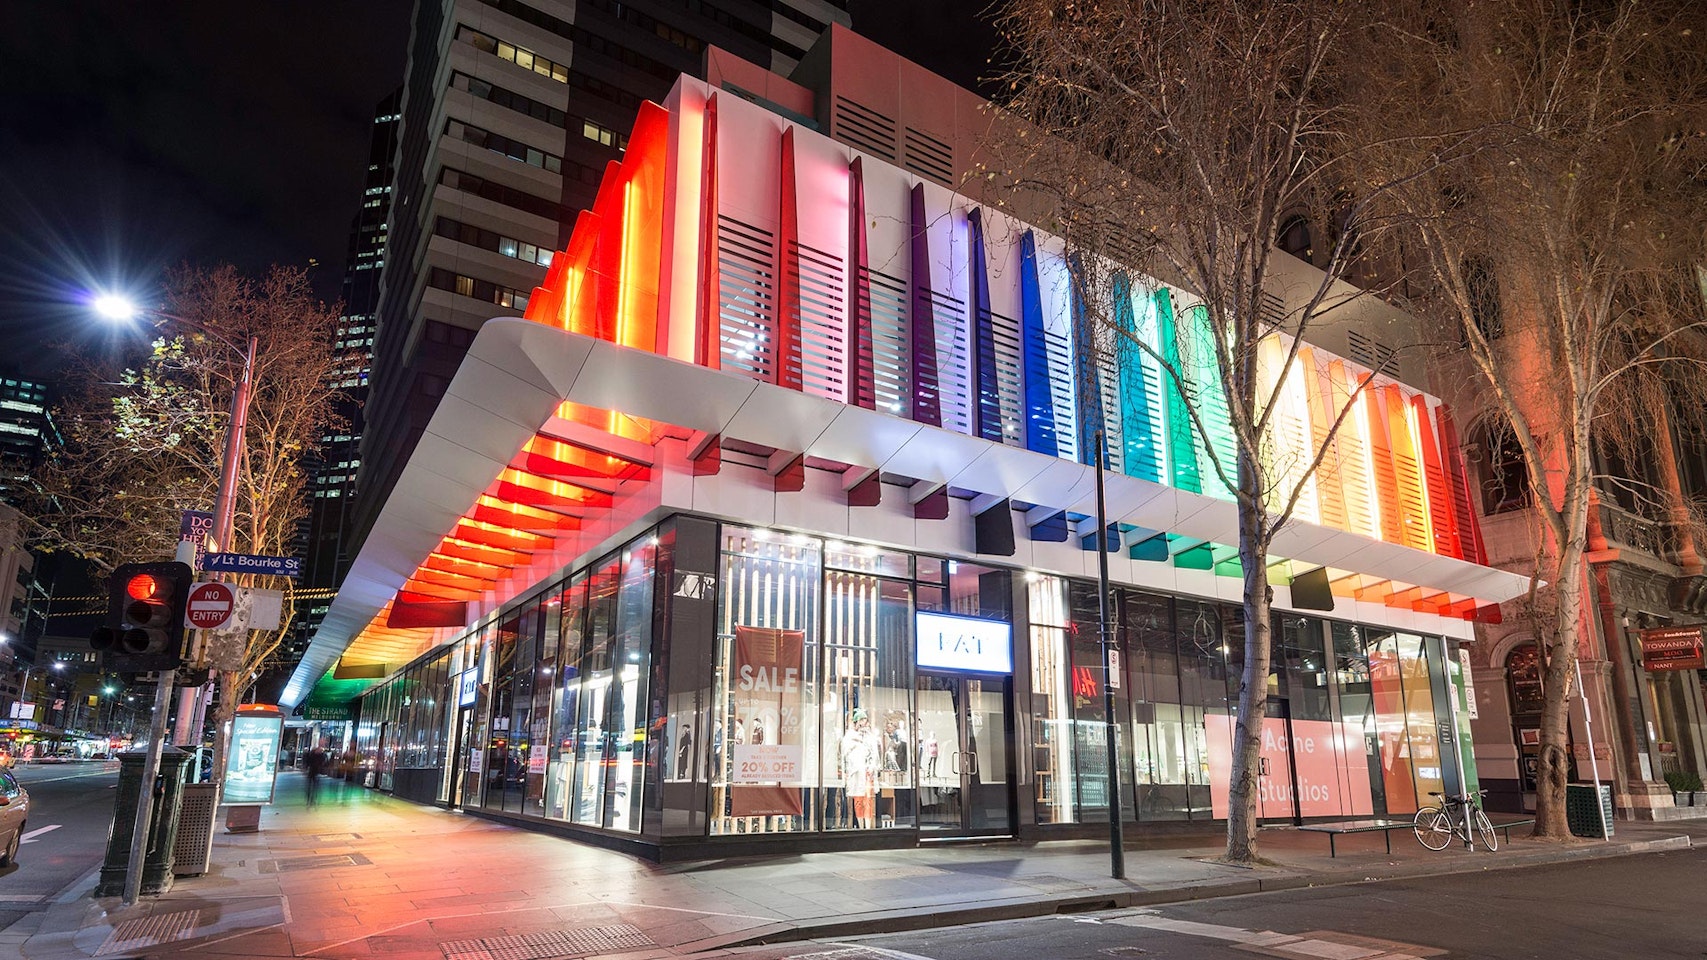 Maxis high-power linear flood light  in application, installed on the Strad Facade in Melbourne CBD. Every second coloured panel is illuminated by a Maxis high-power luminaire.